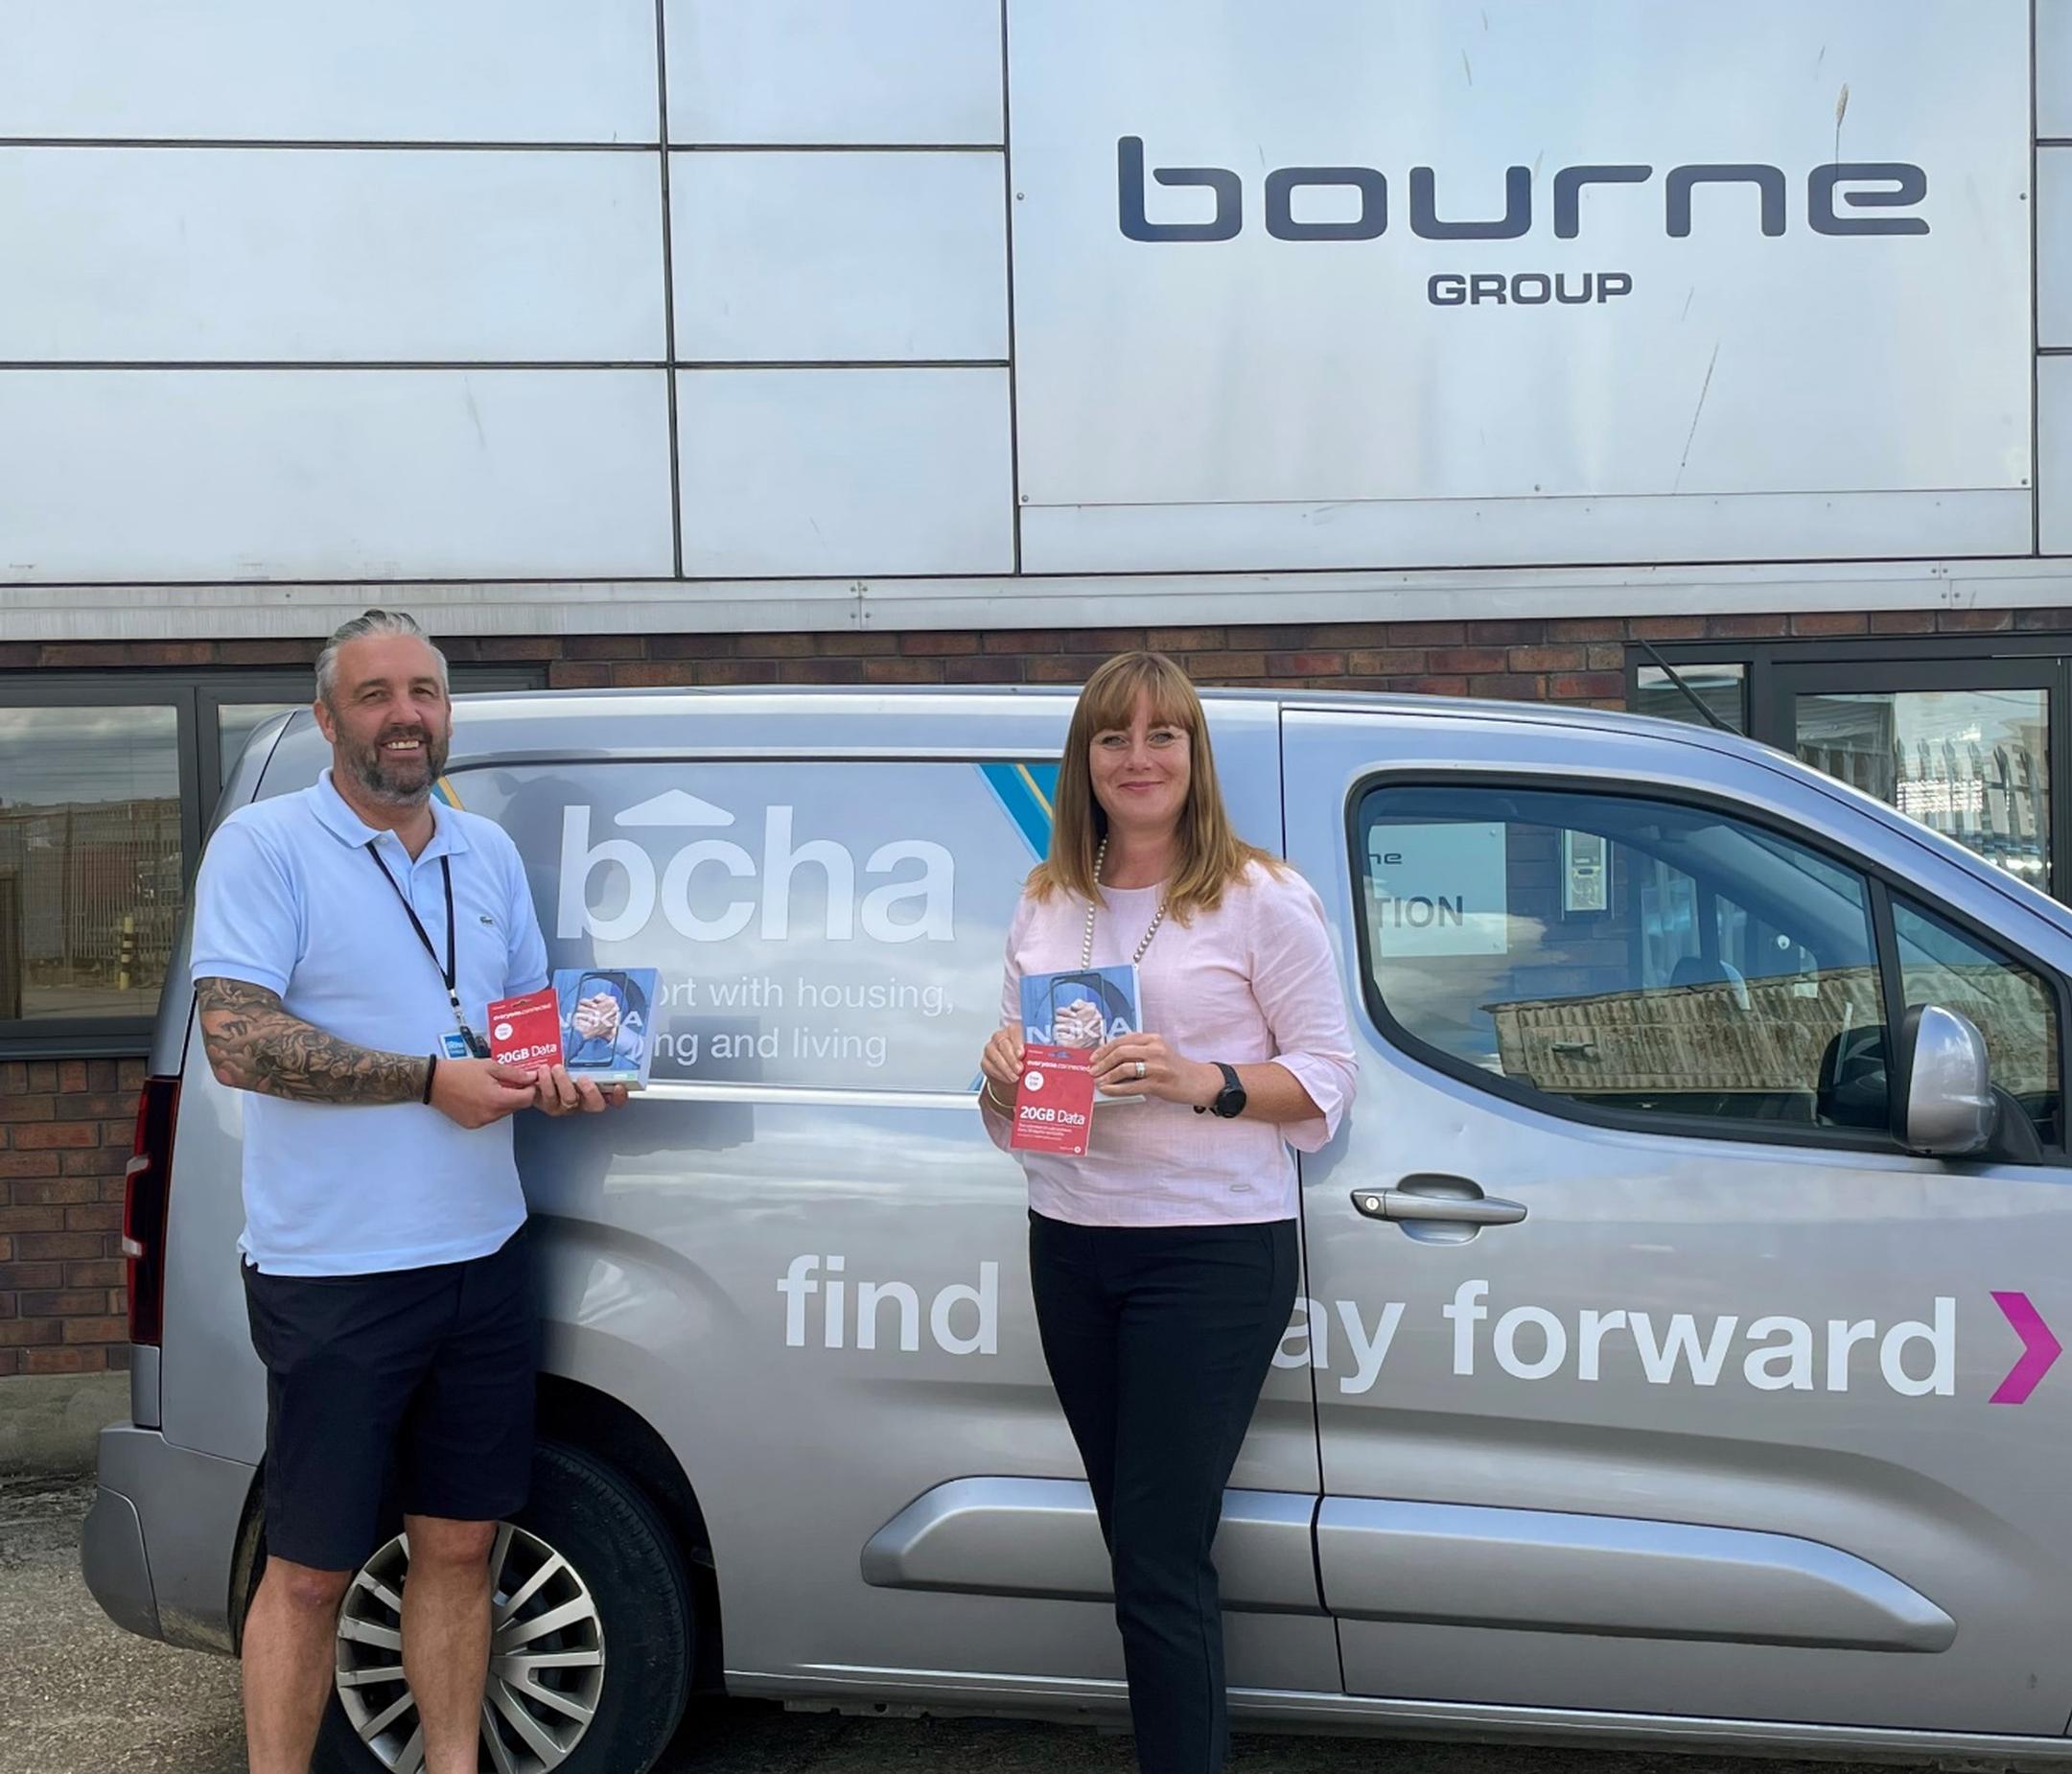 Daryl Gibbins, BCHA’s business support services manager, and Clare Clayton, group HR director at Bourne Group